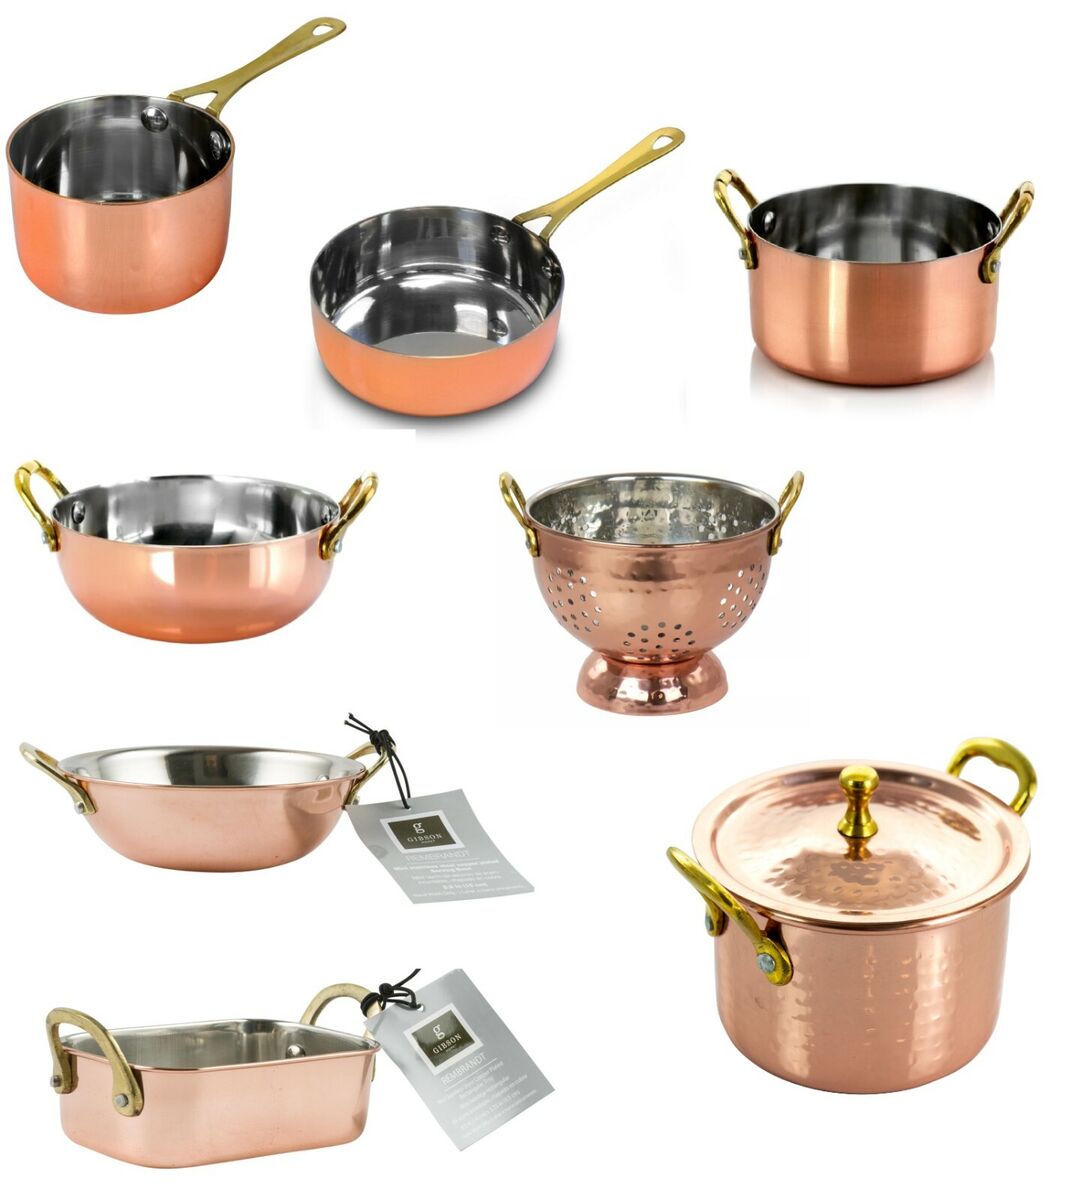 Mini Copper Stainless Steel Cookware Grill Fry Sauce Pan Pot Casserole More